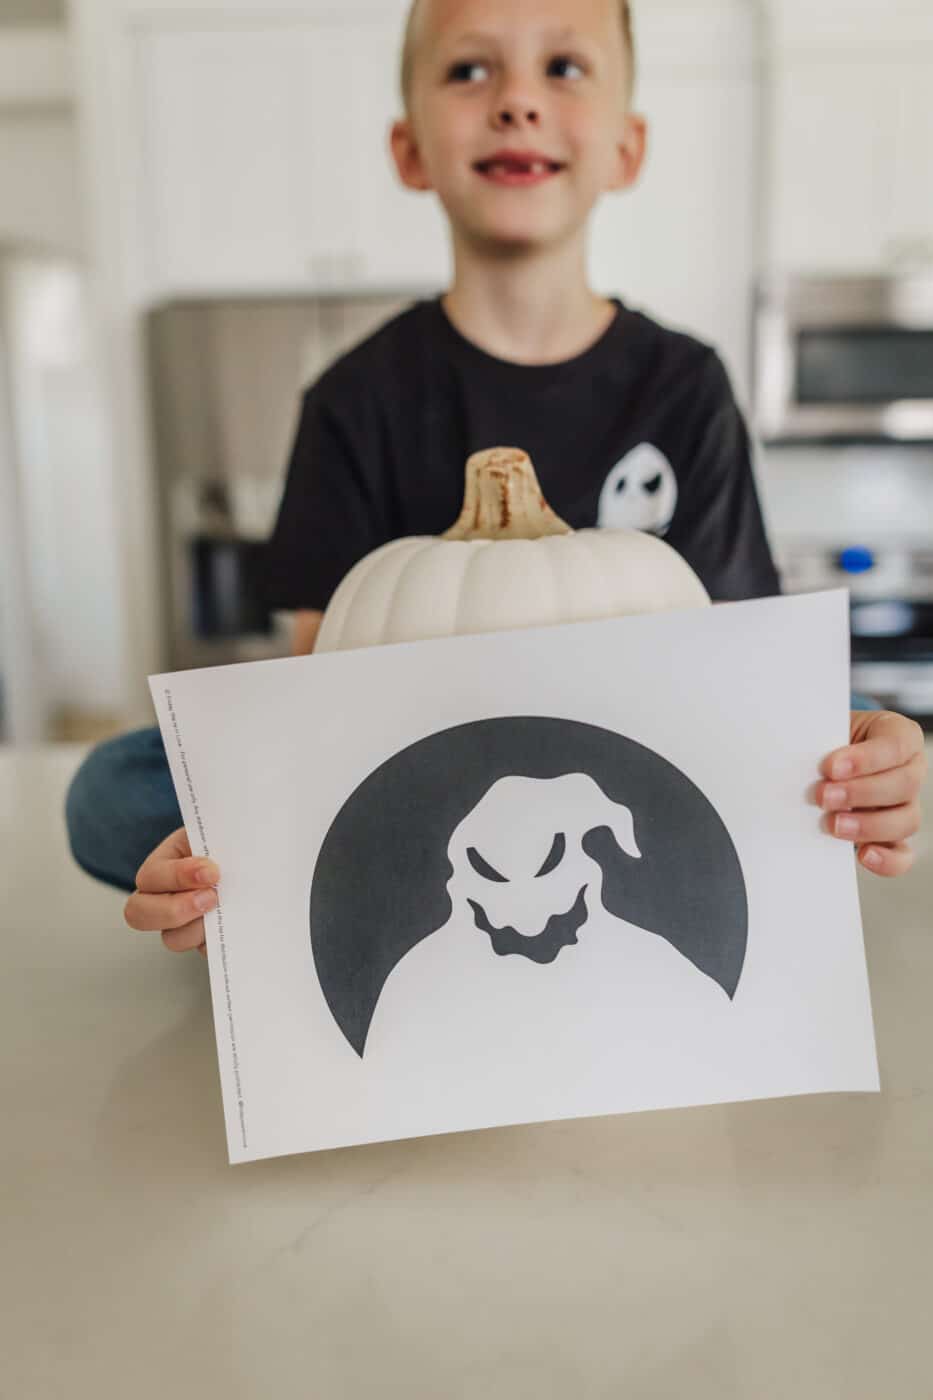 Oogie Boogie carving template print out in front of an un-carved pumpkin. 